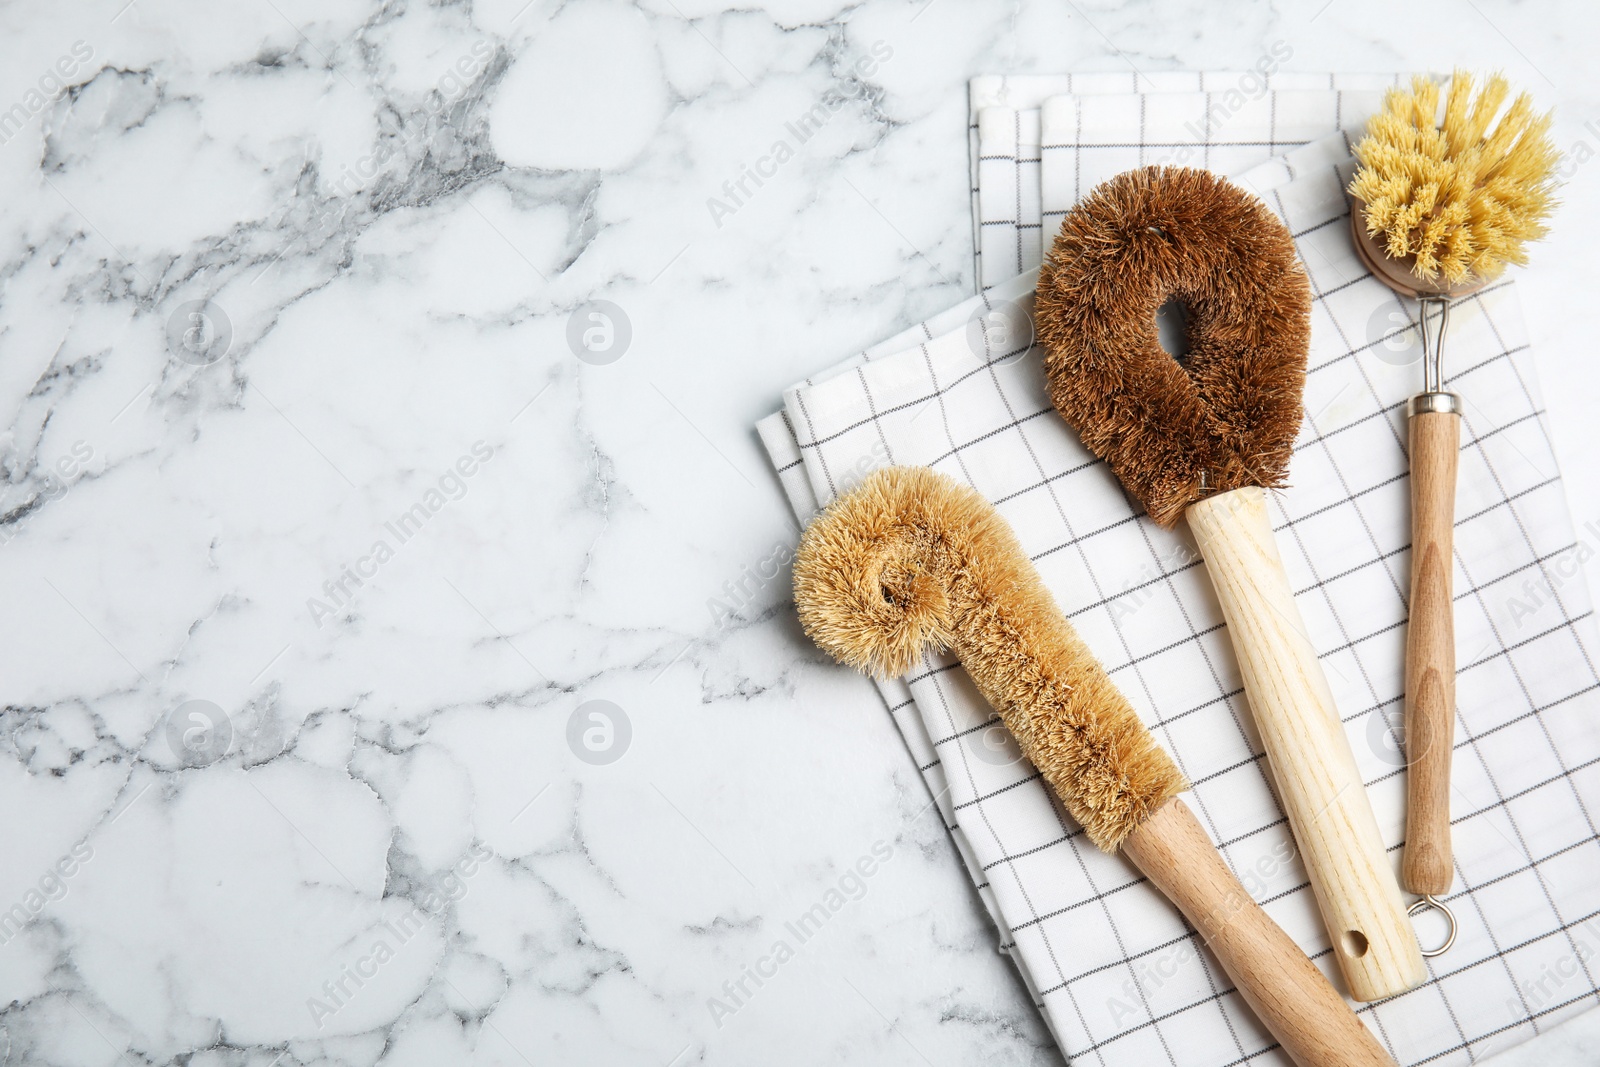 Photo of Cleaning brushes on white marble table, flat lay with space for text. Dish washing supplies